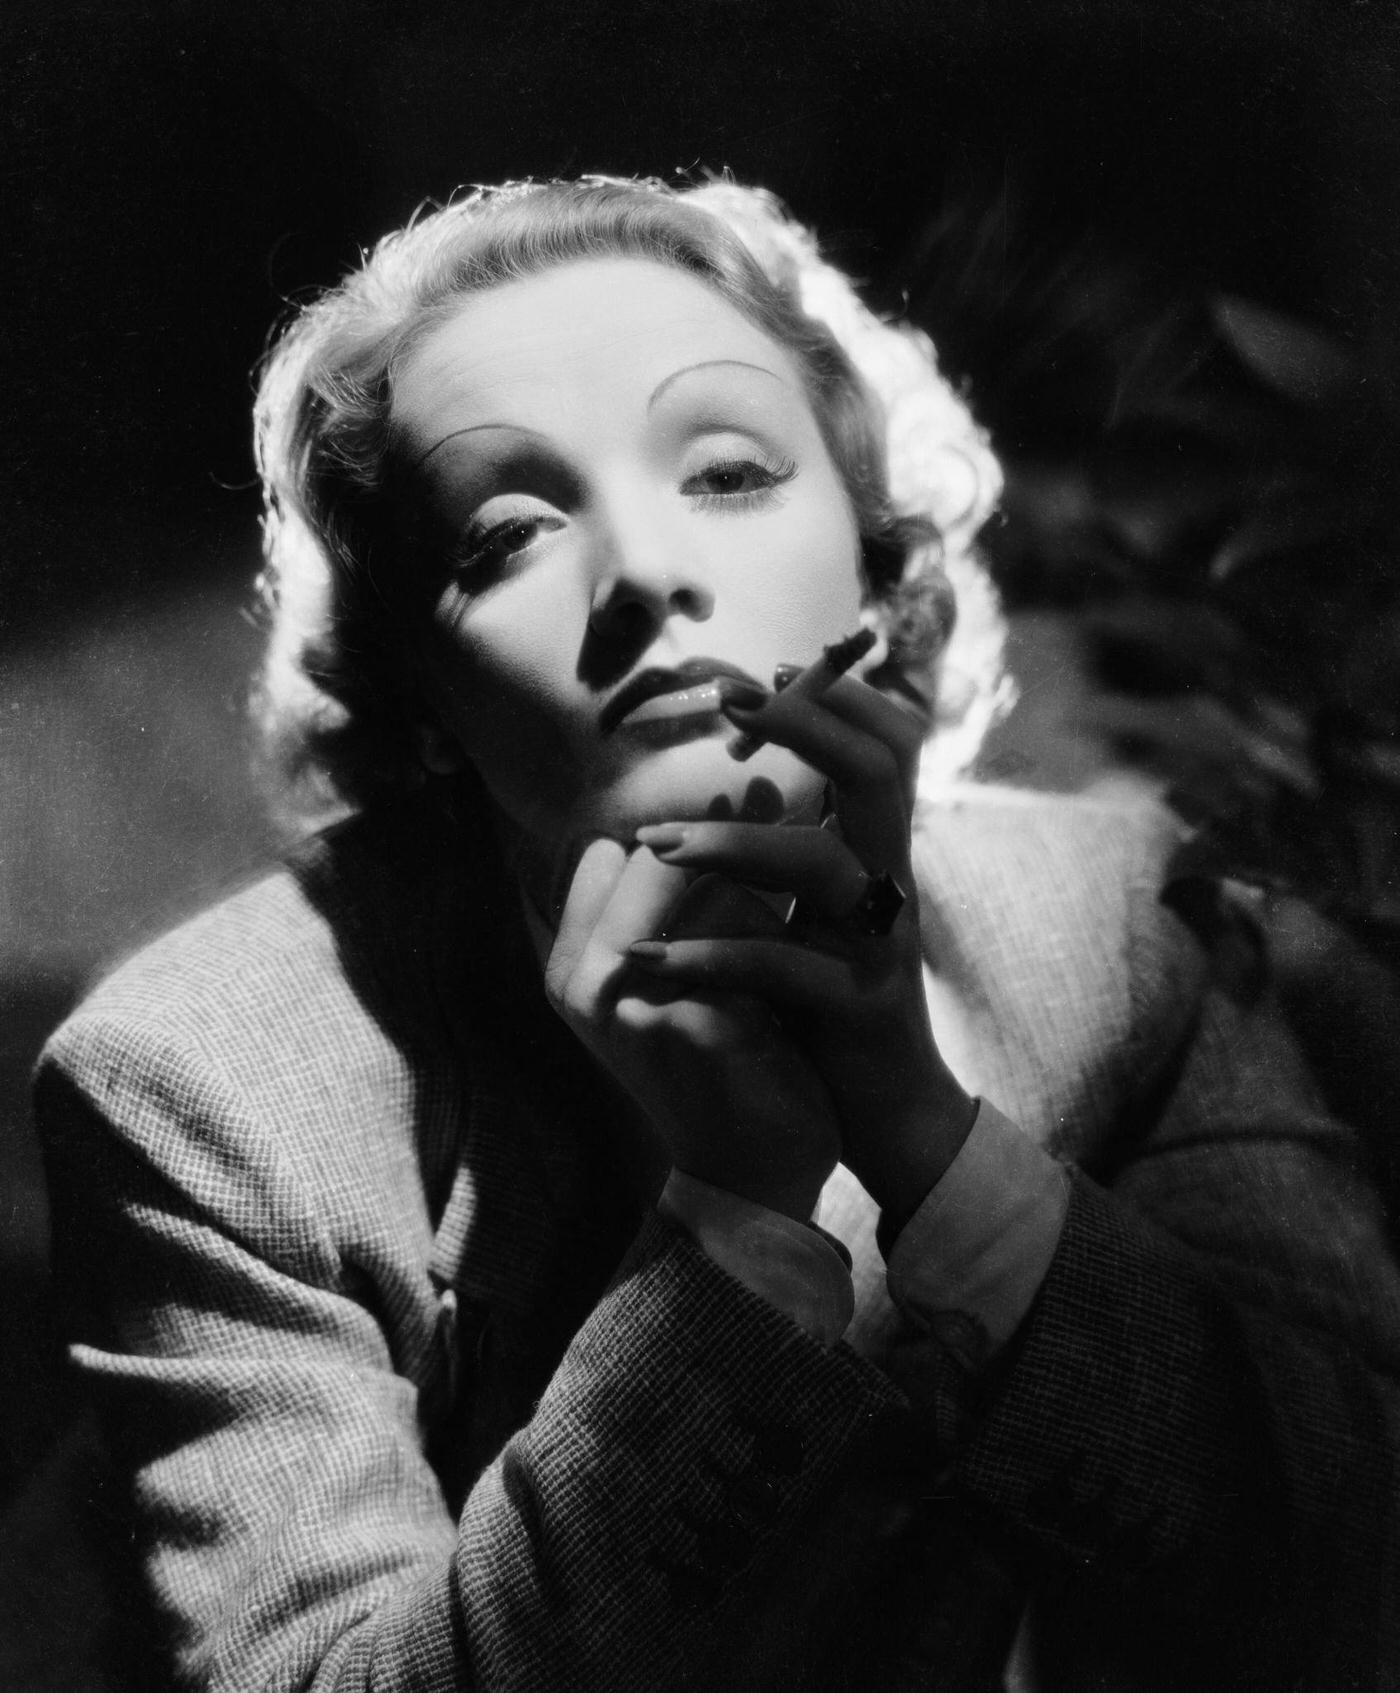 Marlene Dietrich oozes sensuality while smoking in the 1930s.